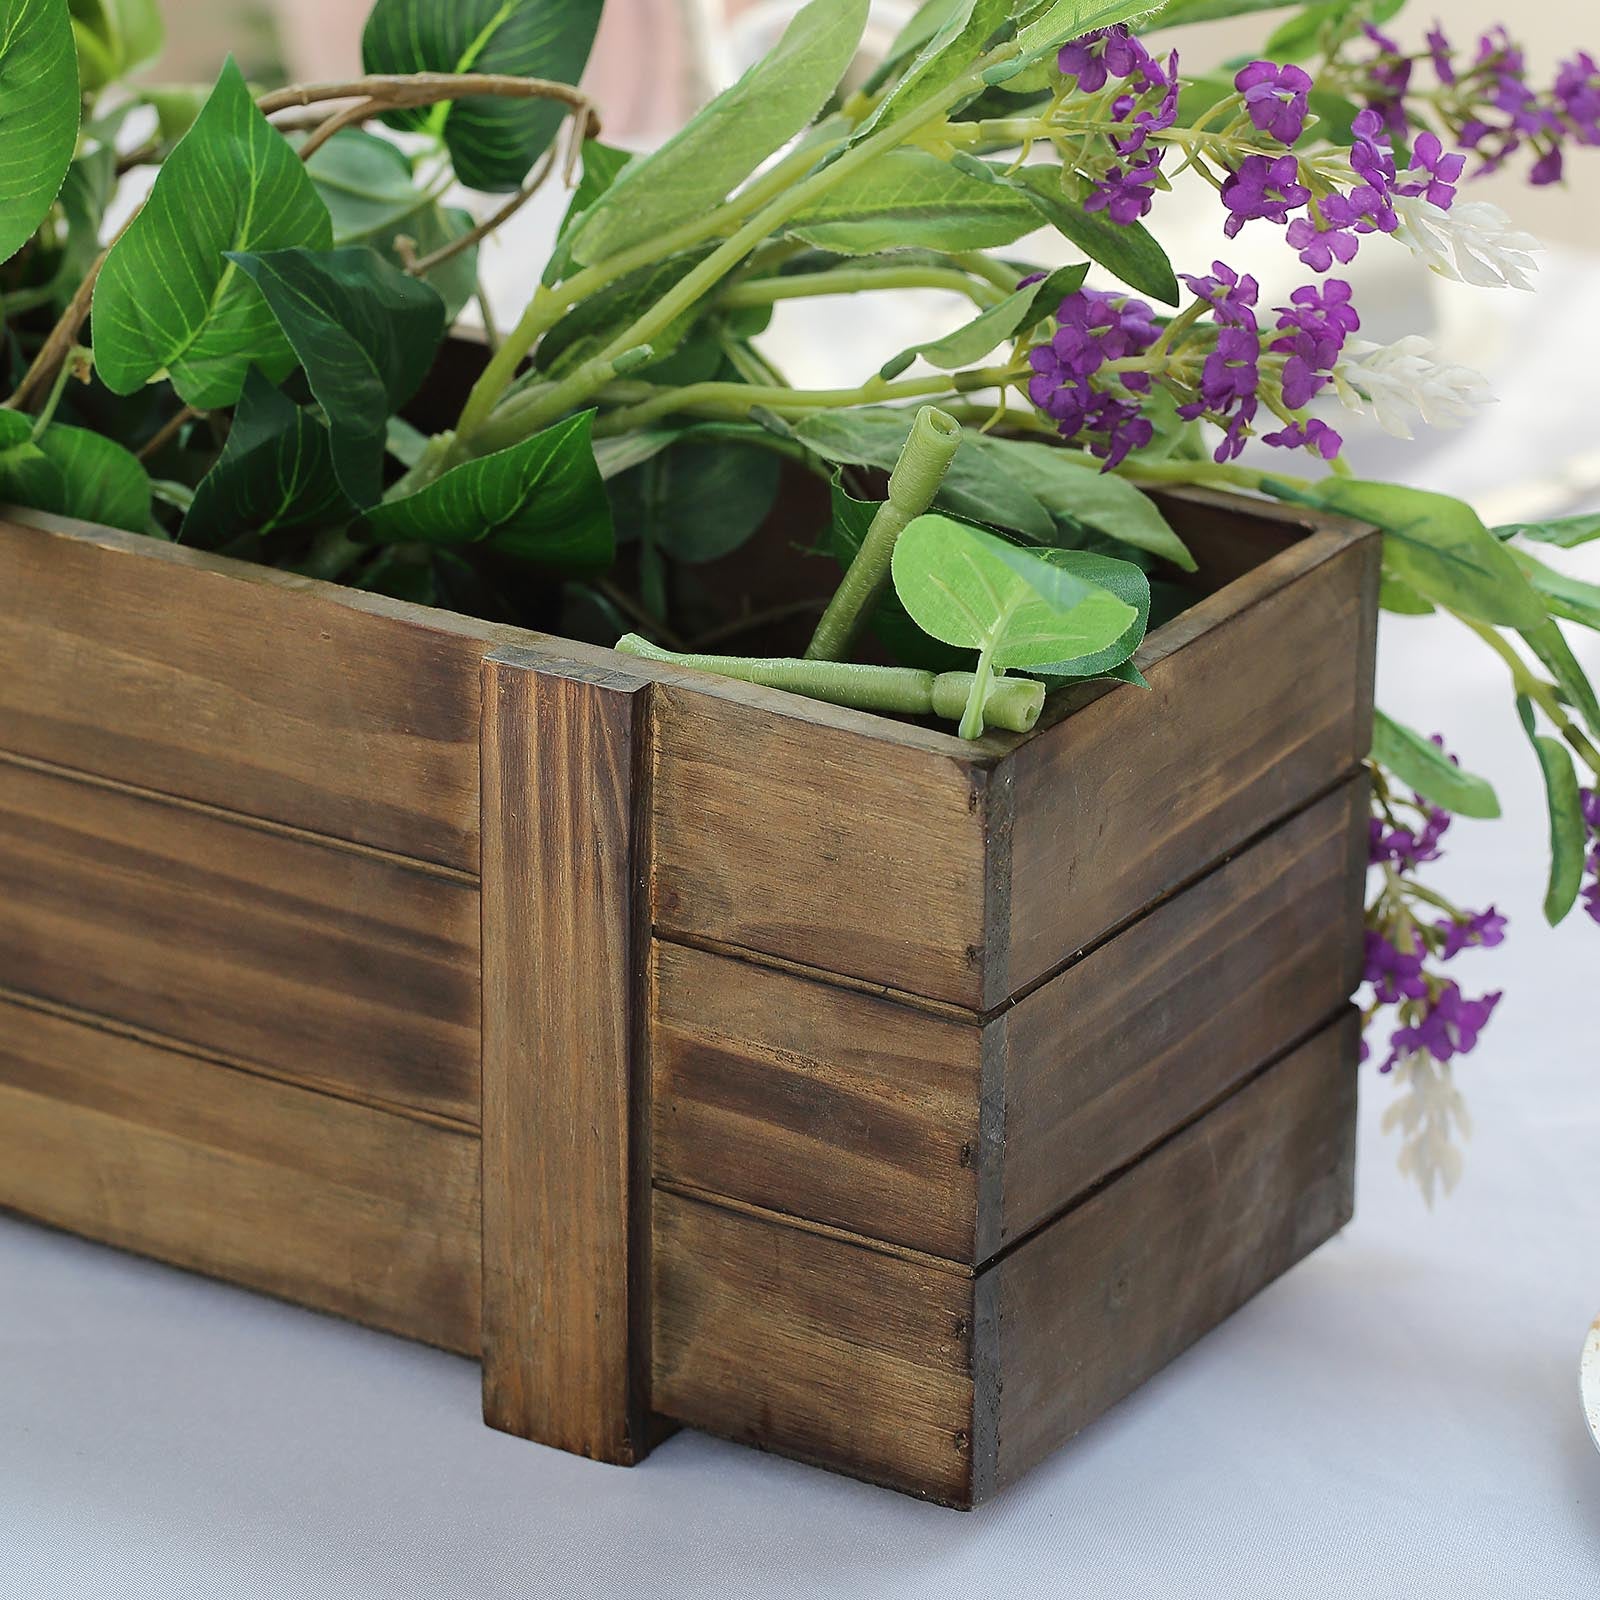 24x6'' Rectangle Wood Boxes DIY Rustic Wooden Planter 